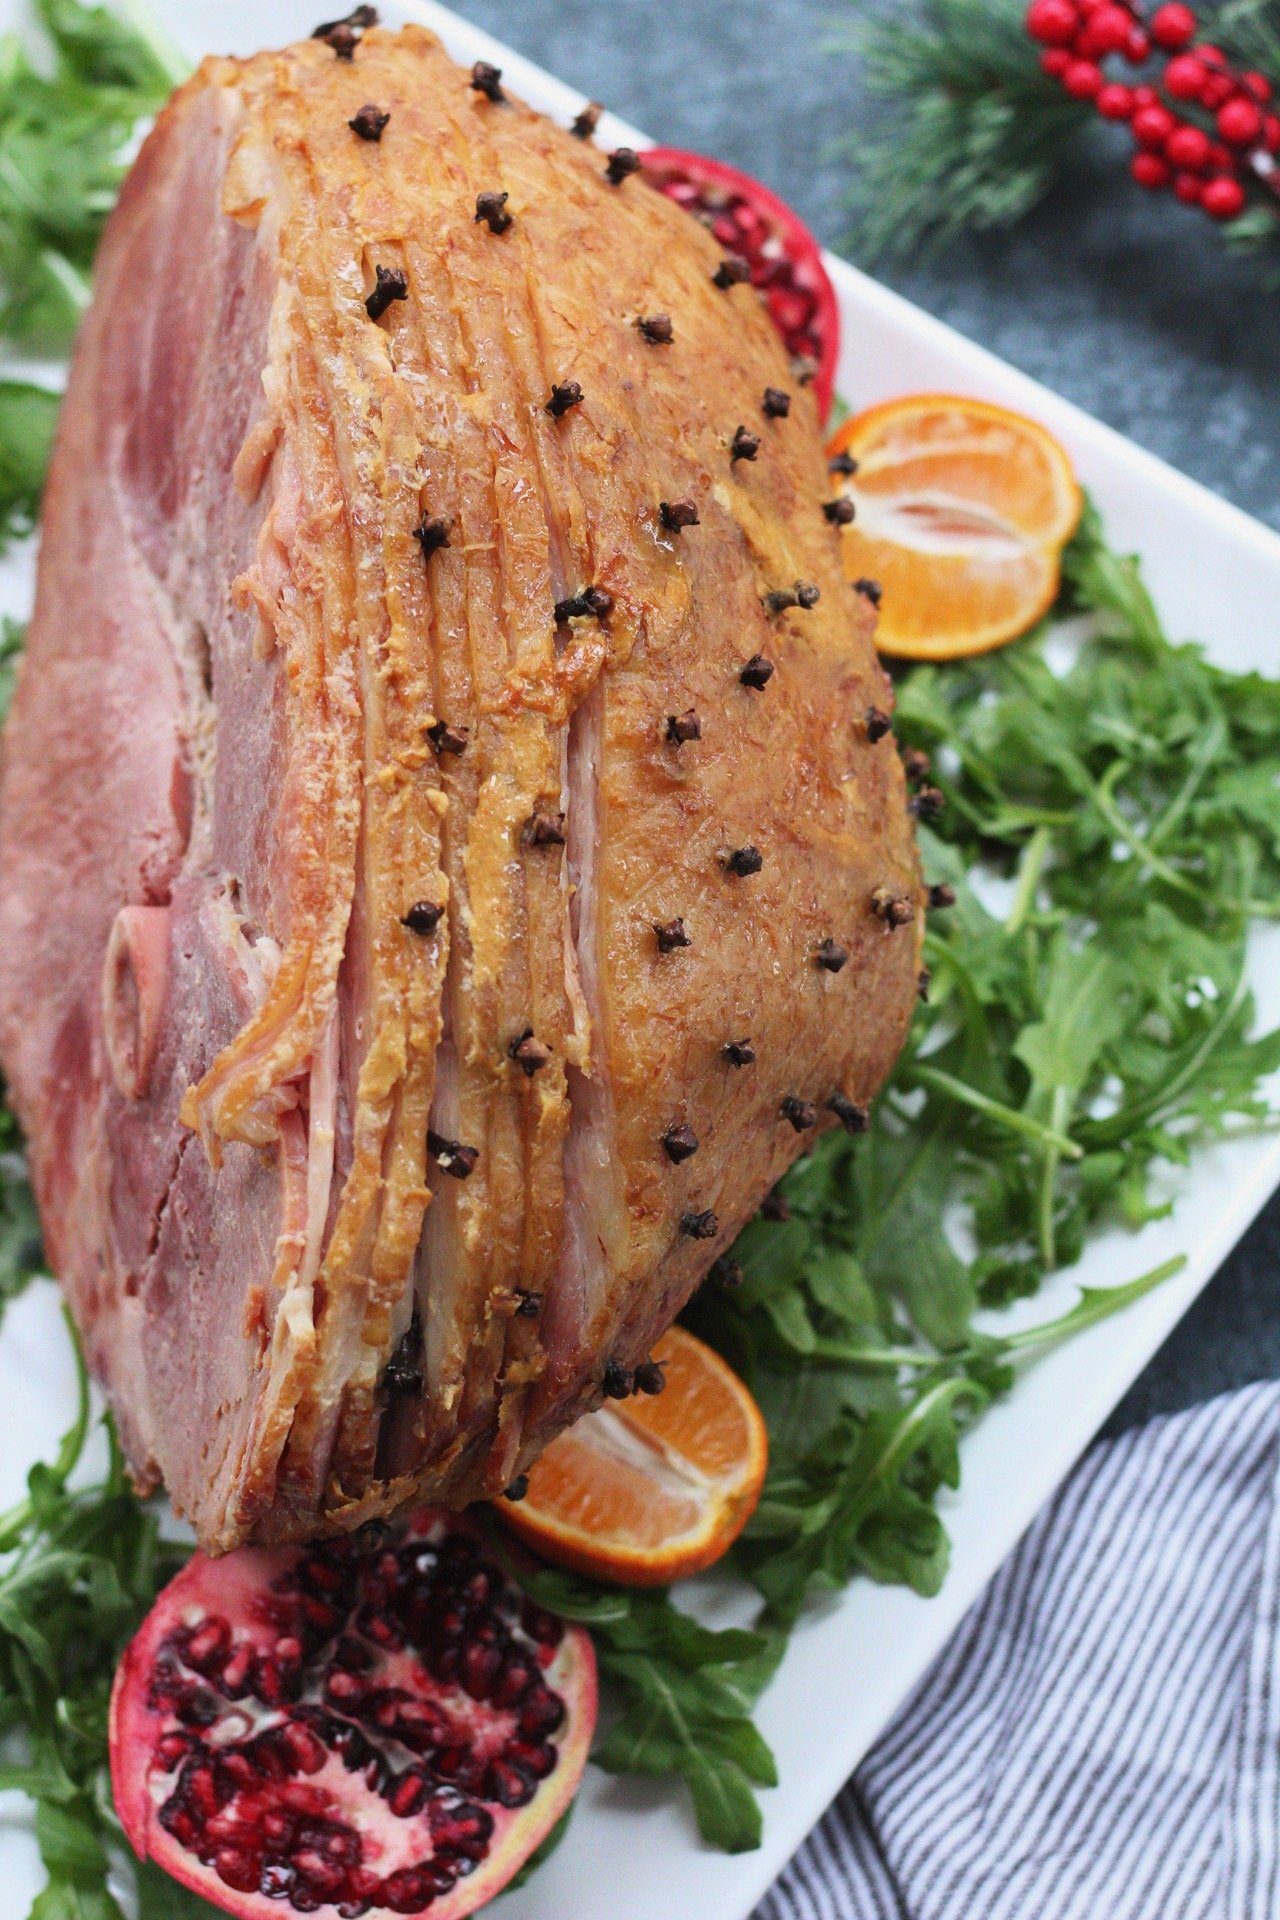 Three ingredient Whole30 holiday ham is a family friendly recipe everyone will enjoy. Made with a sugar free ham, this clean eating recipe will be a hit. With a simple recipe, it's quick and easy so you get in and out of the kitchen! #holidayham #paleoham #whole30ham #paleoholidayrecipes